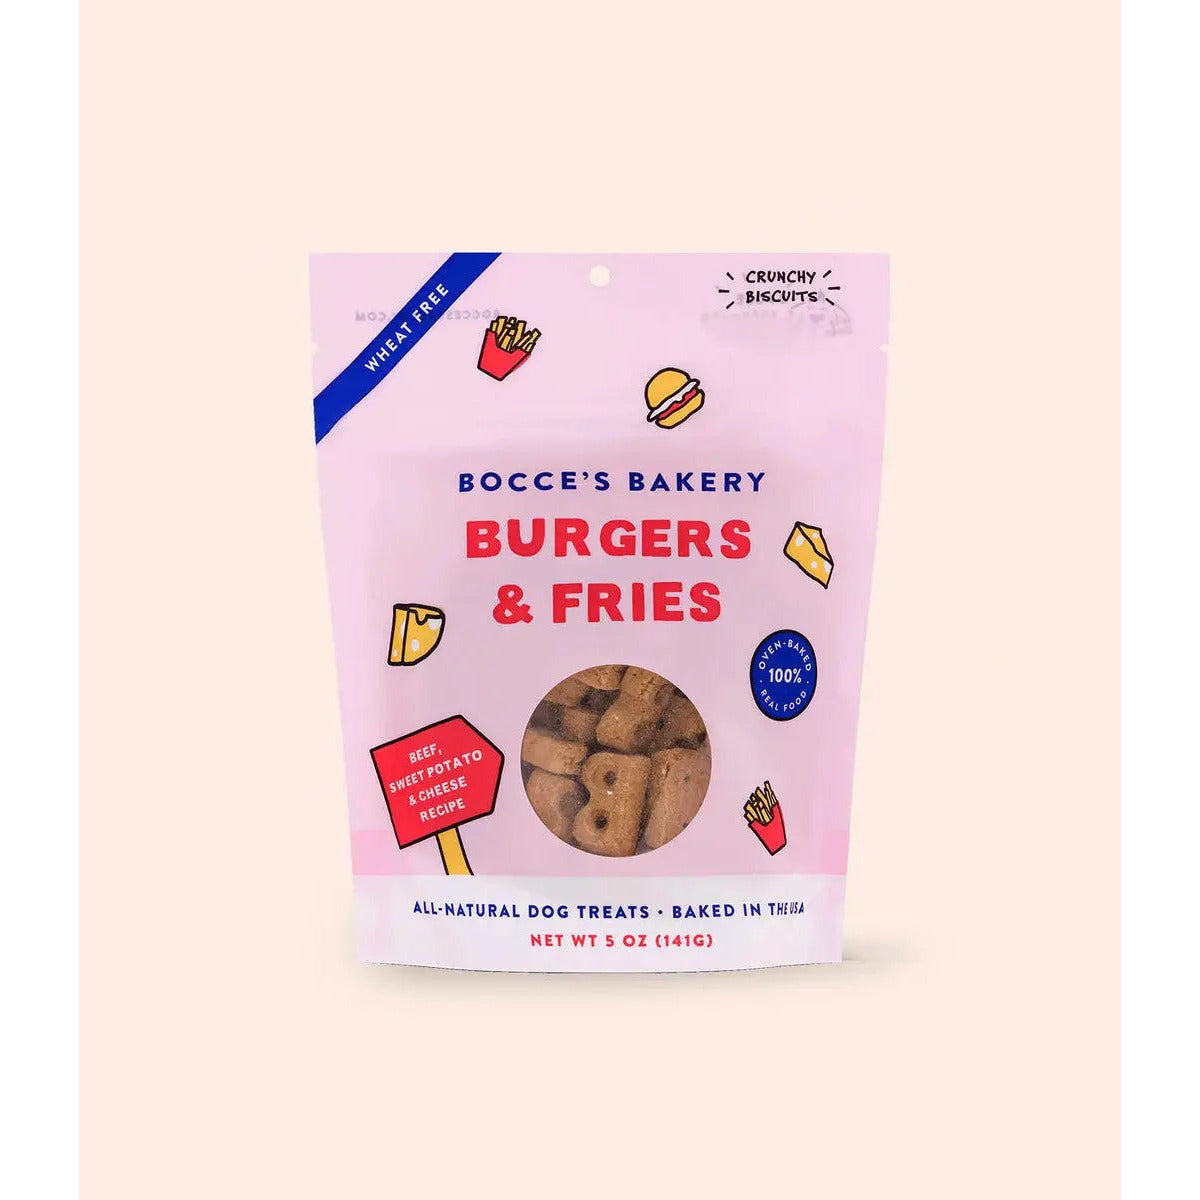 Bocce's Bakery Burgers & Fries 5oz Biscuits Dog Treats Bocce's Bakery